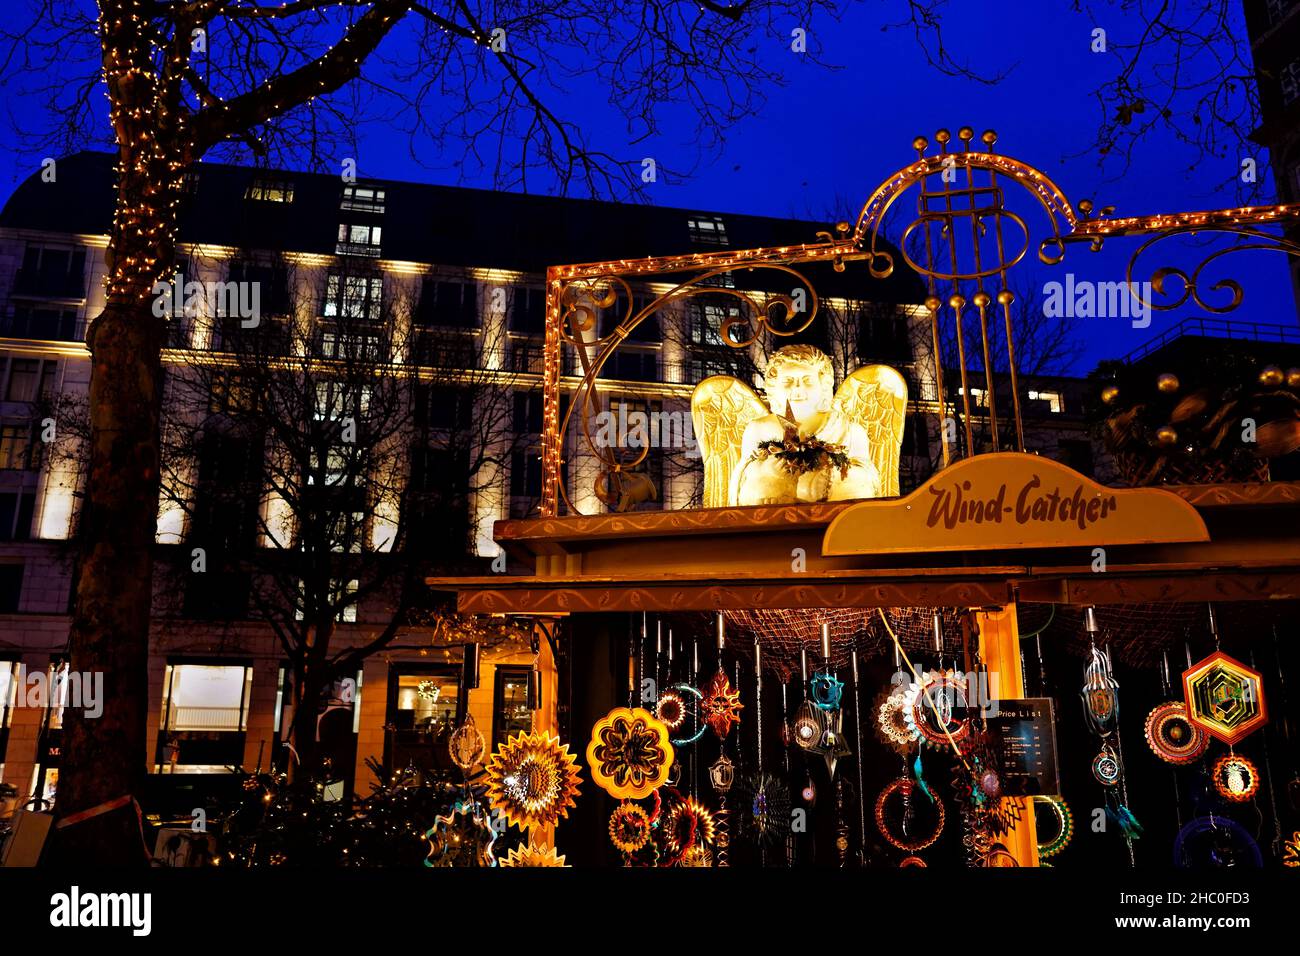 Beautiful Christmas stand selling wind cathcers at the traditional 'Engelchen-Markt' Christmas market in Düsseldorf, Germany. Stock Photo